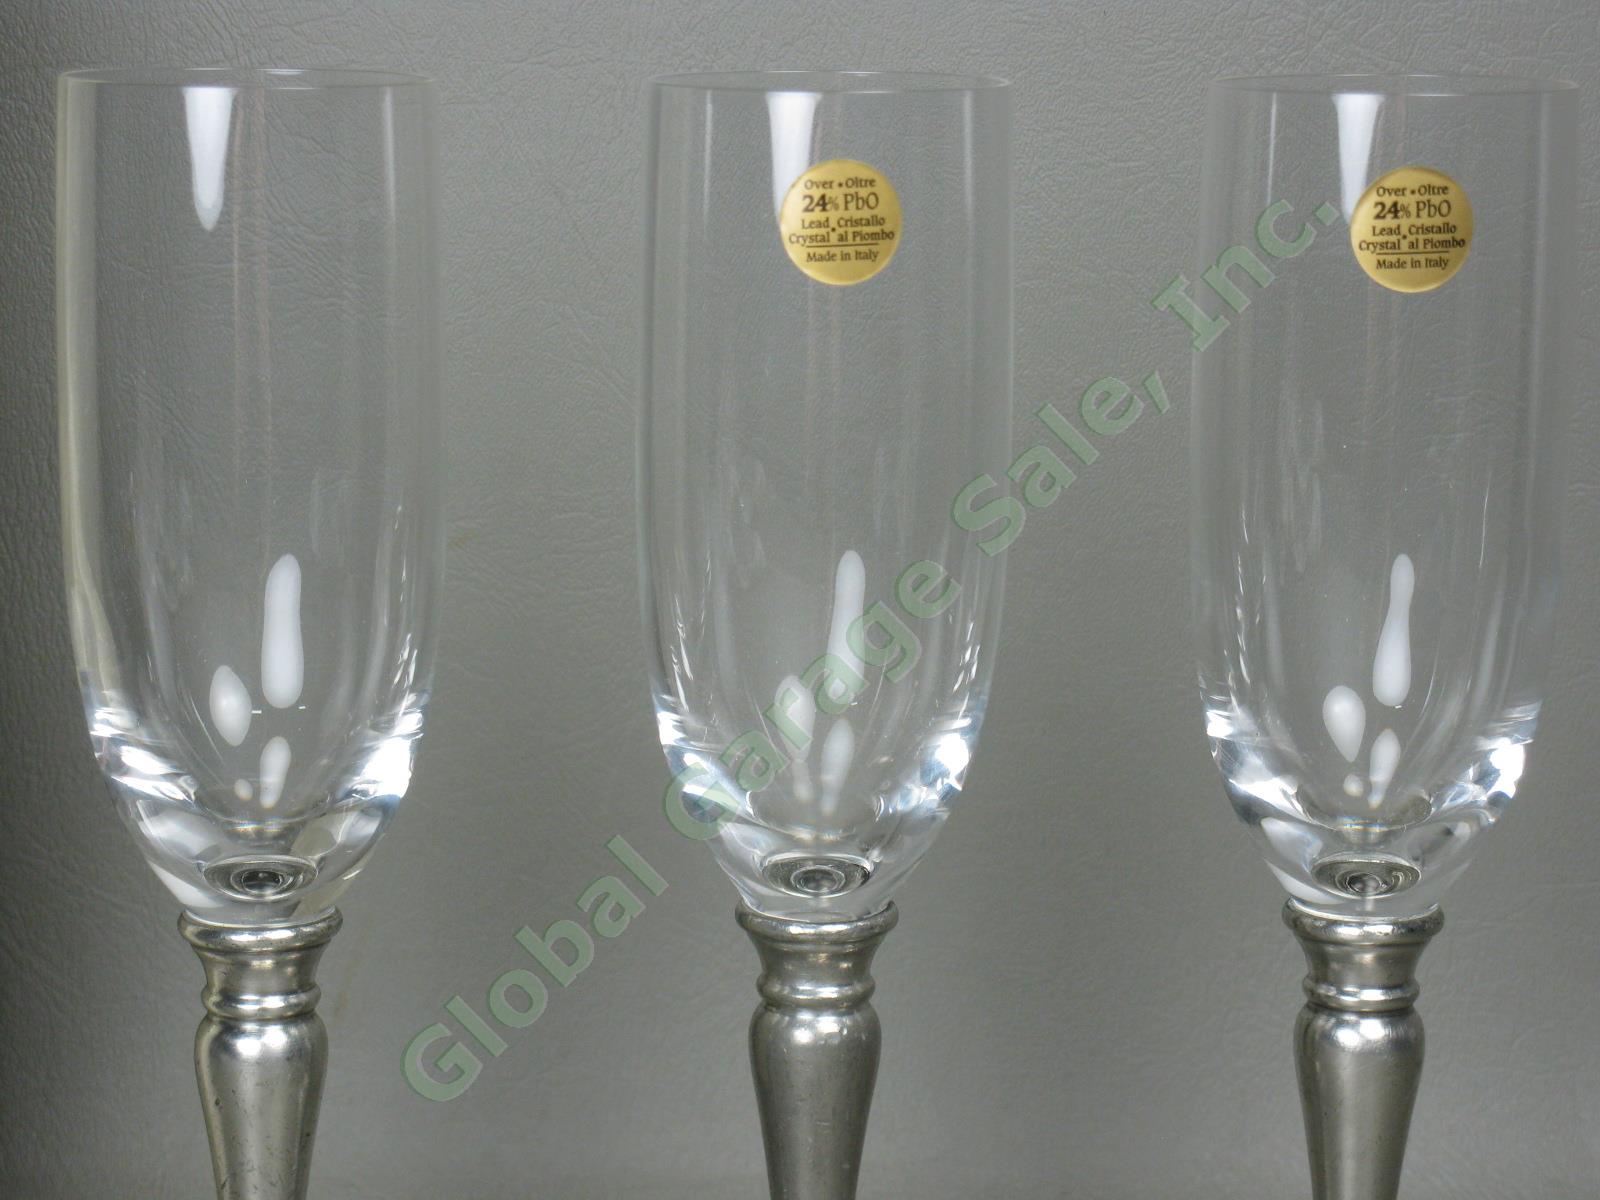 3 NEW Match Pewter 8" Champagne Flutes Glasses Made In Italy $90 Each Retail NR! 1